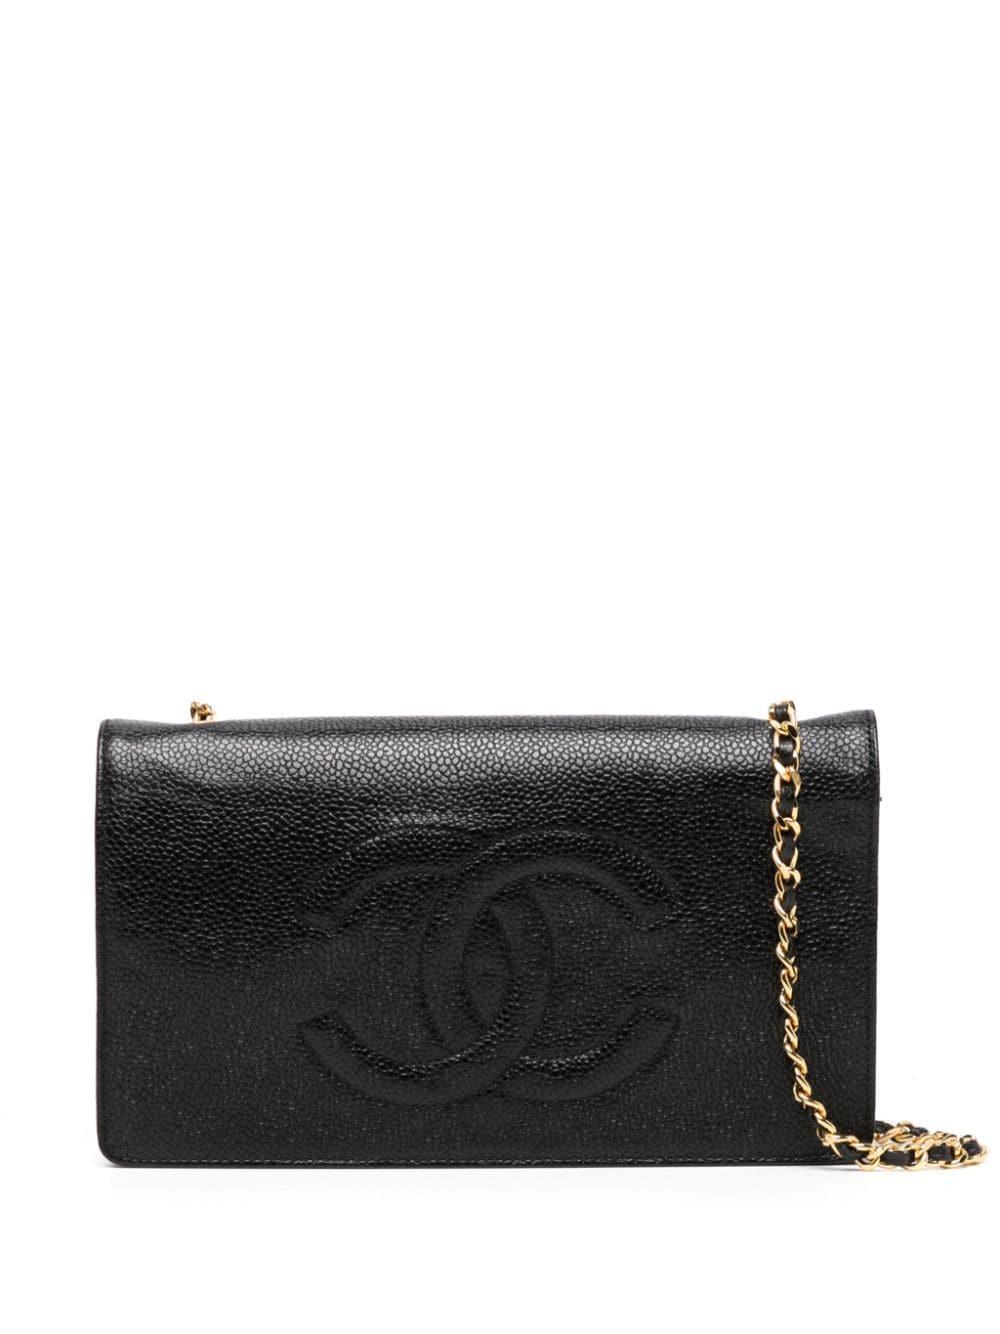 Chanel 1996 Vintage Woc Wallet On A Chain Black Calfskin Leather Cross Body Bag For Sale